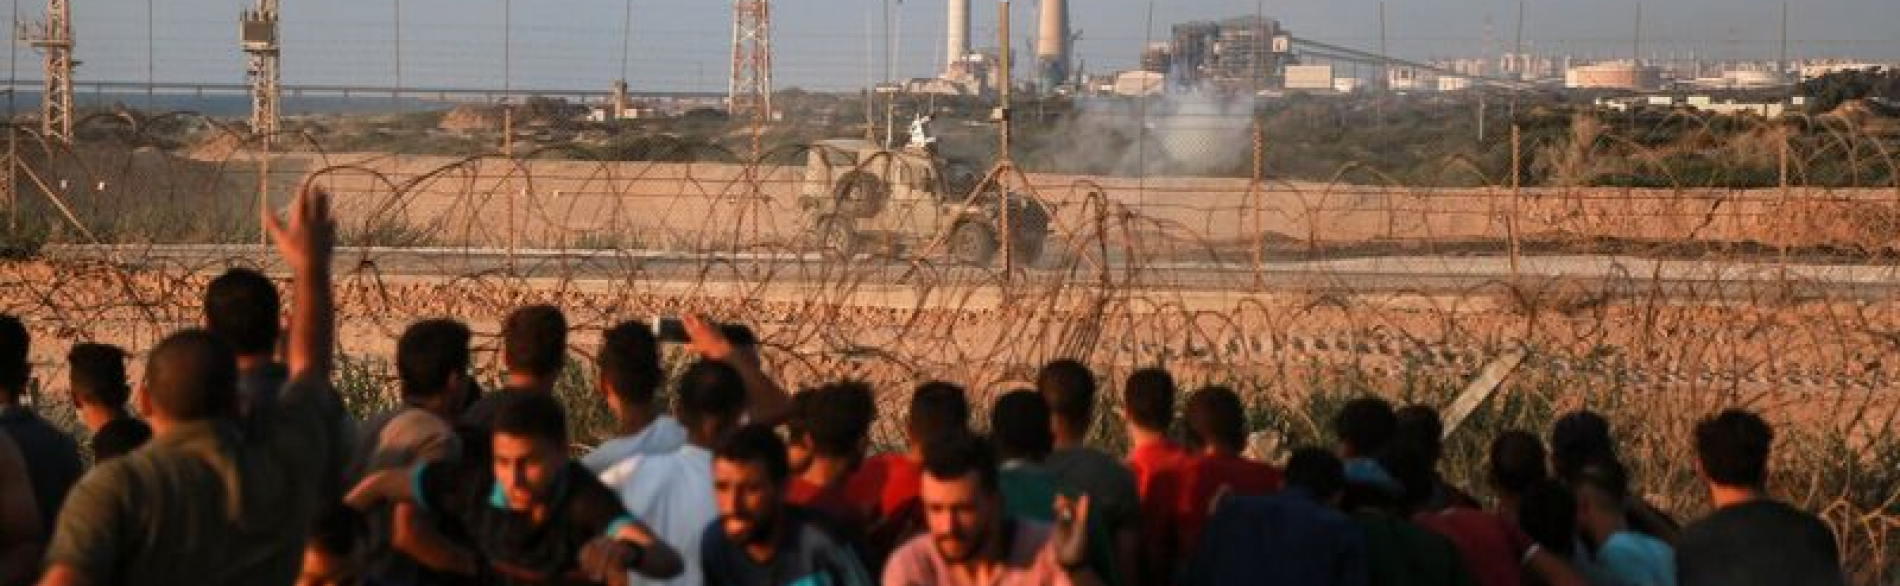 Gaza demonstrations at the perimetre fence continue, 17 September 2018. © Photo by Mohammed Dahman